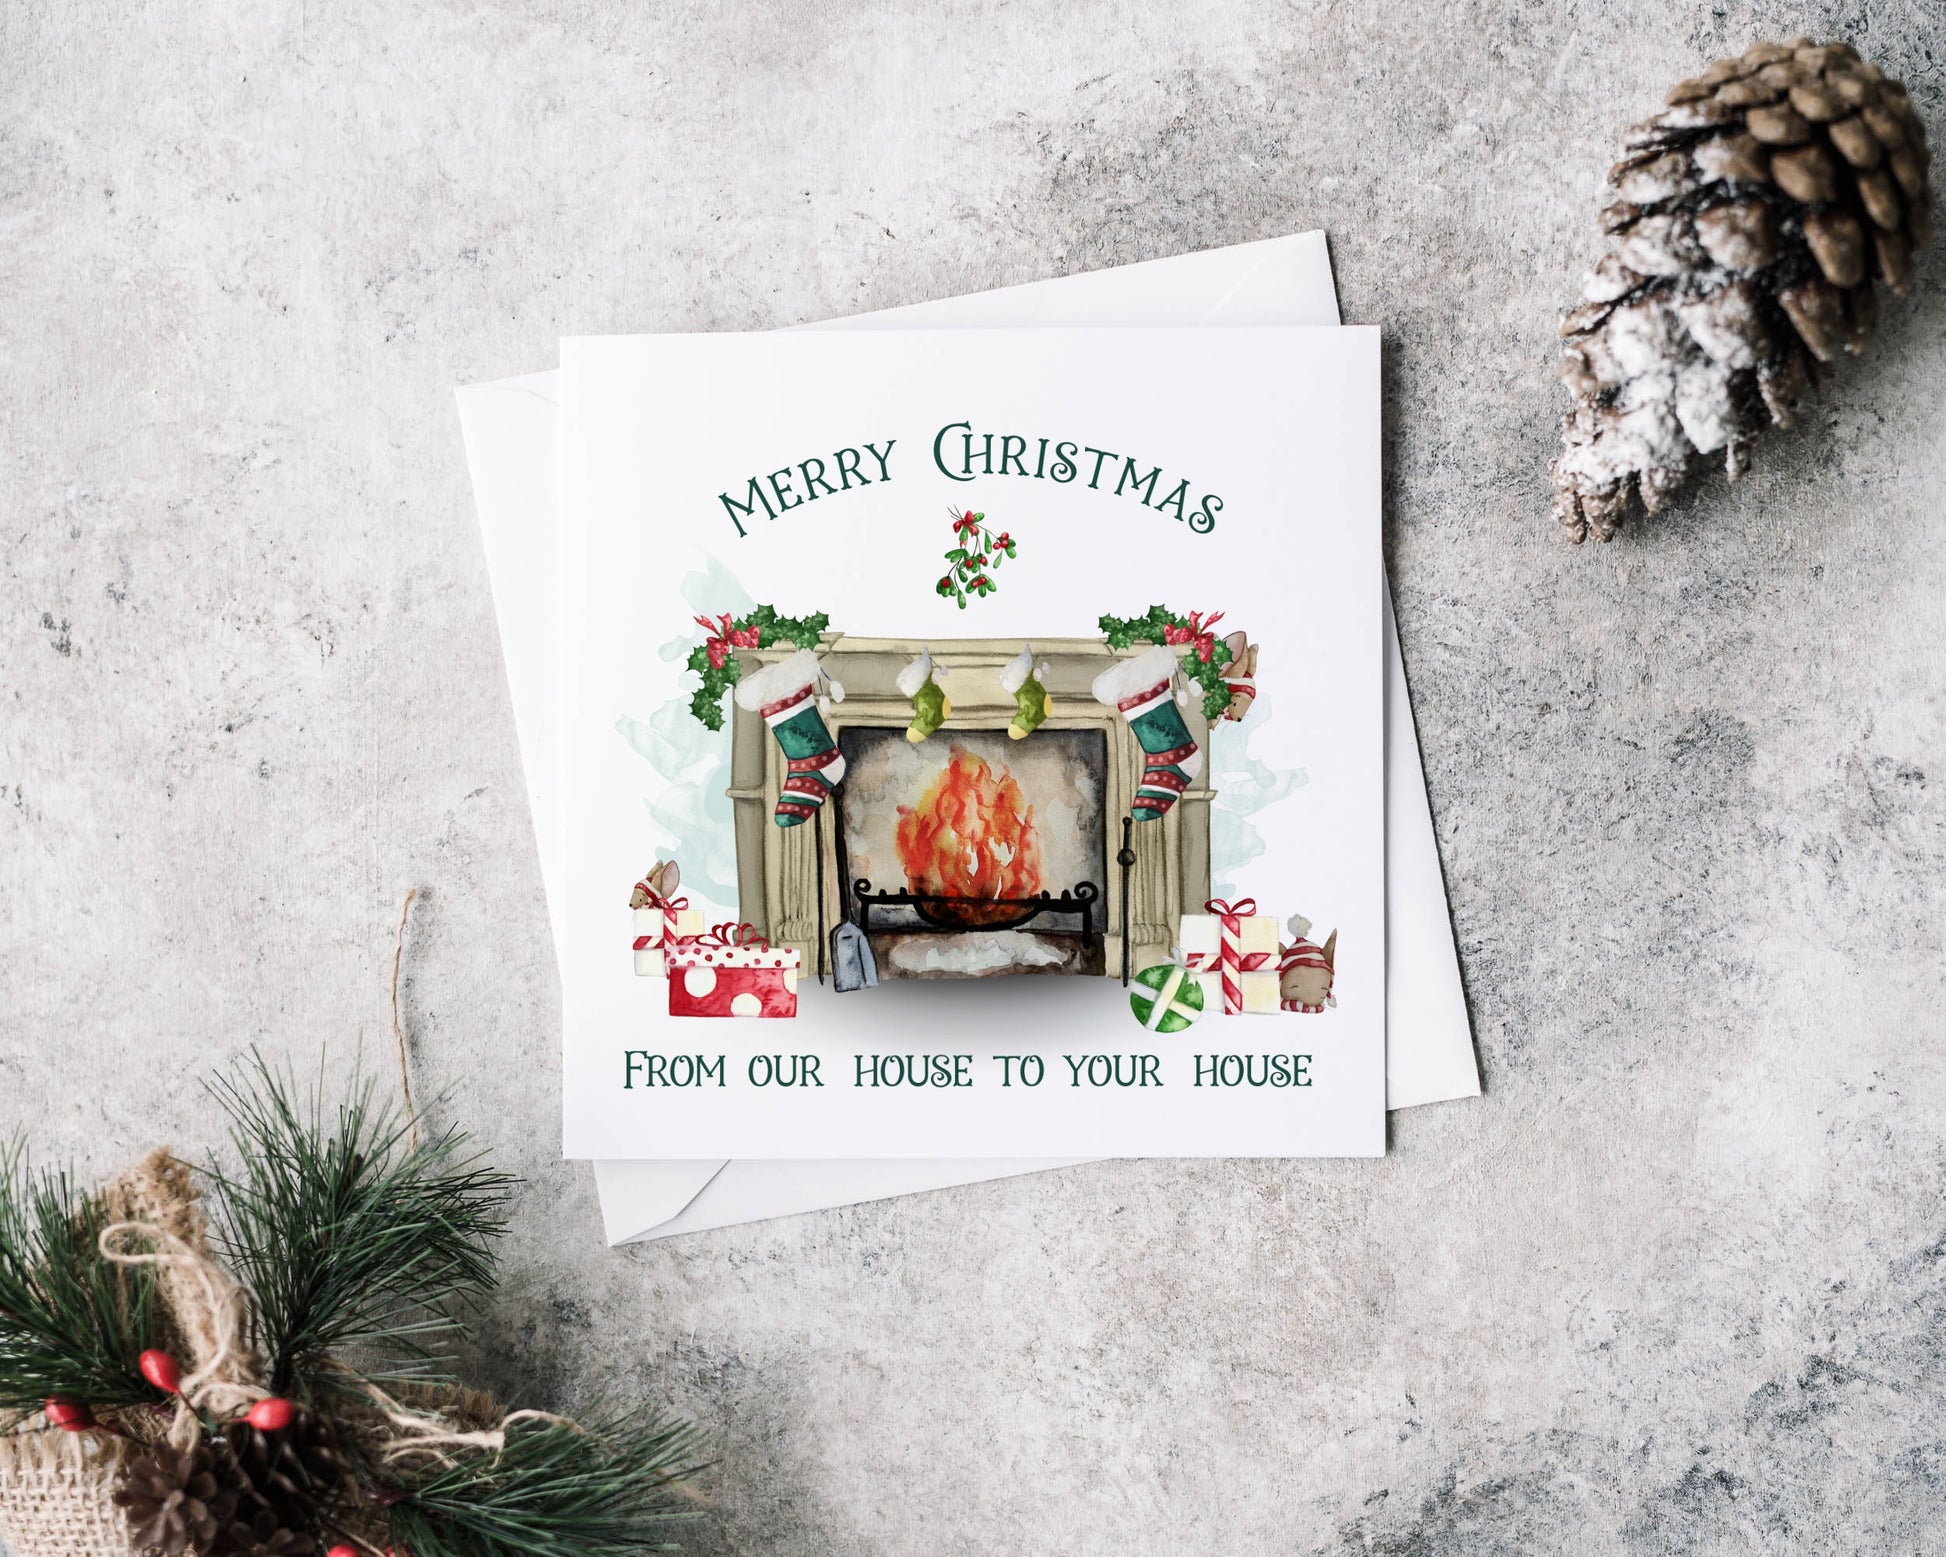 Personalised Christmas greeting card featuring a traditional fireplace, green and red stockings, cute mice and gifts